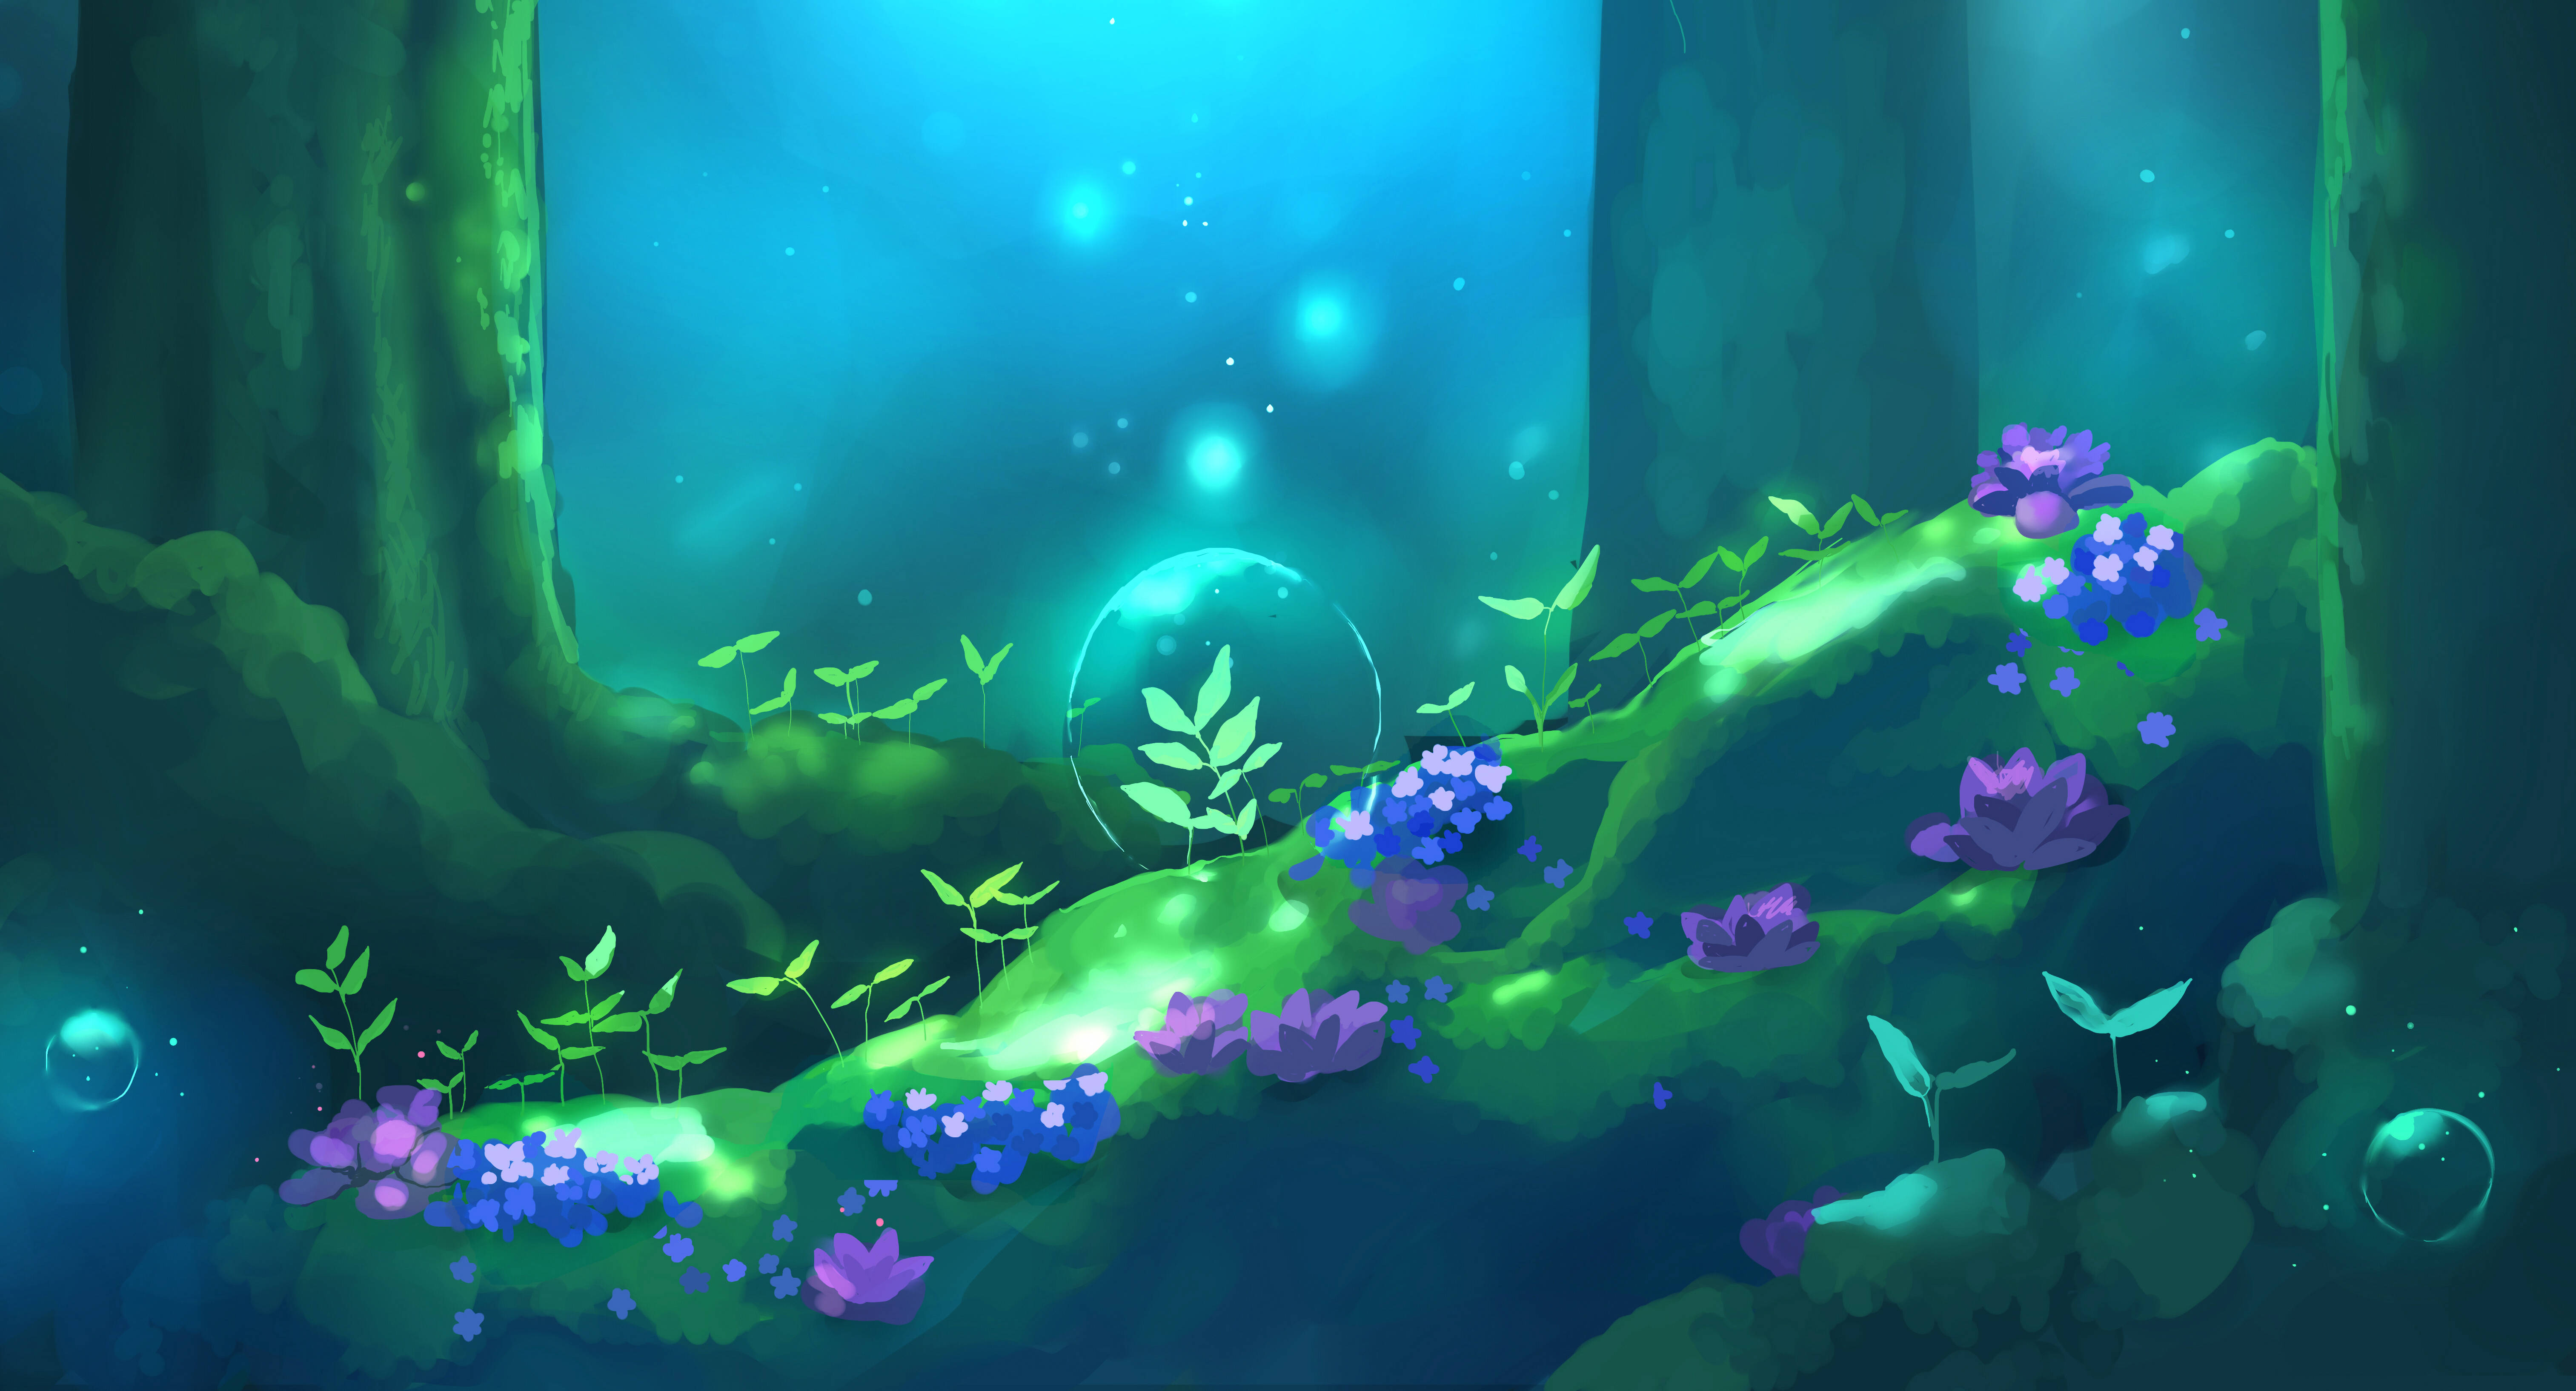 Forest With Magic Lights Art Background